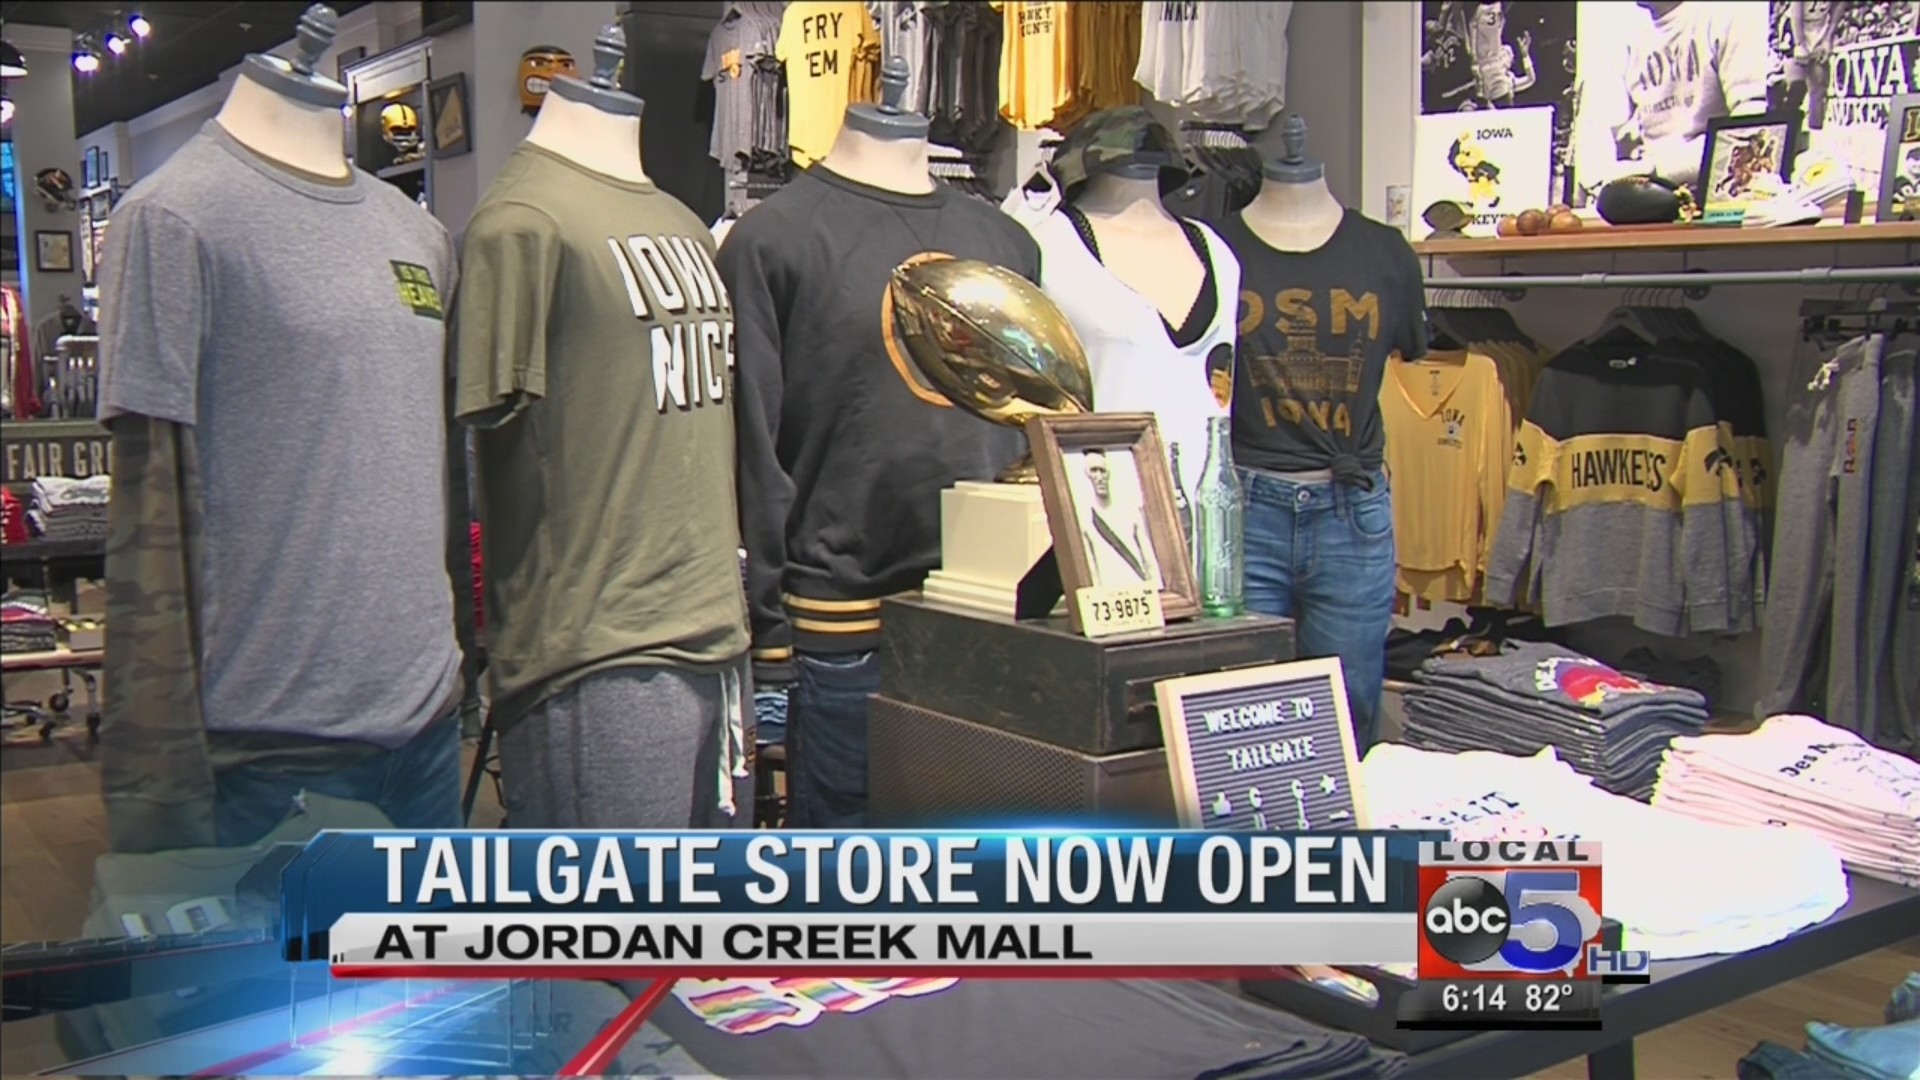 8 new stores coming to Jordan Creek mall in West Des Moines